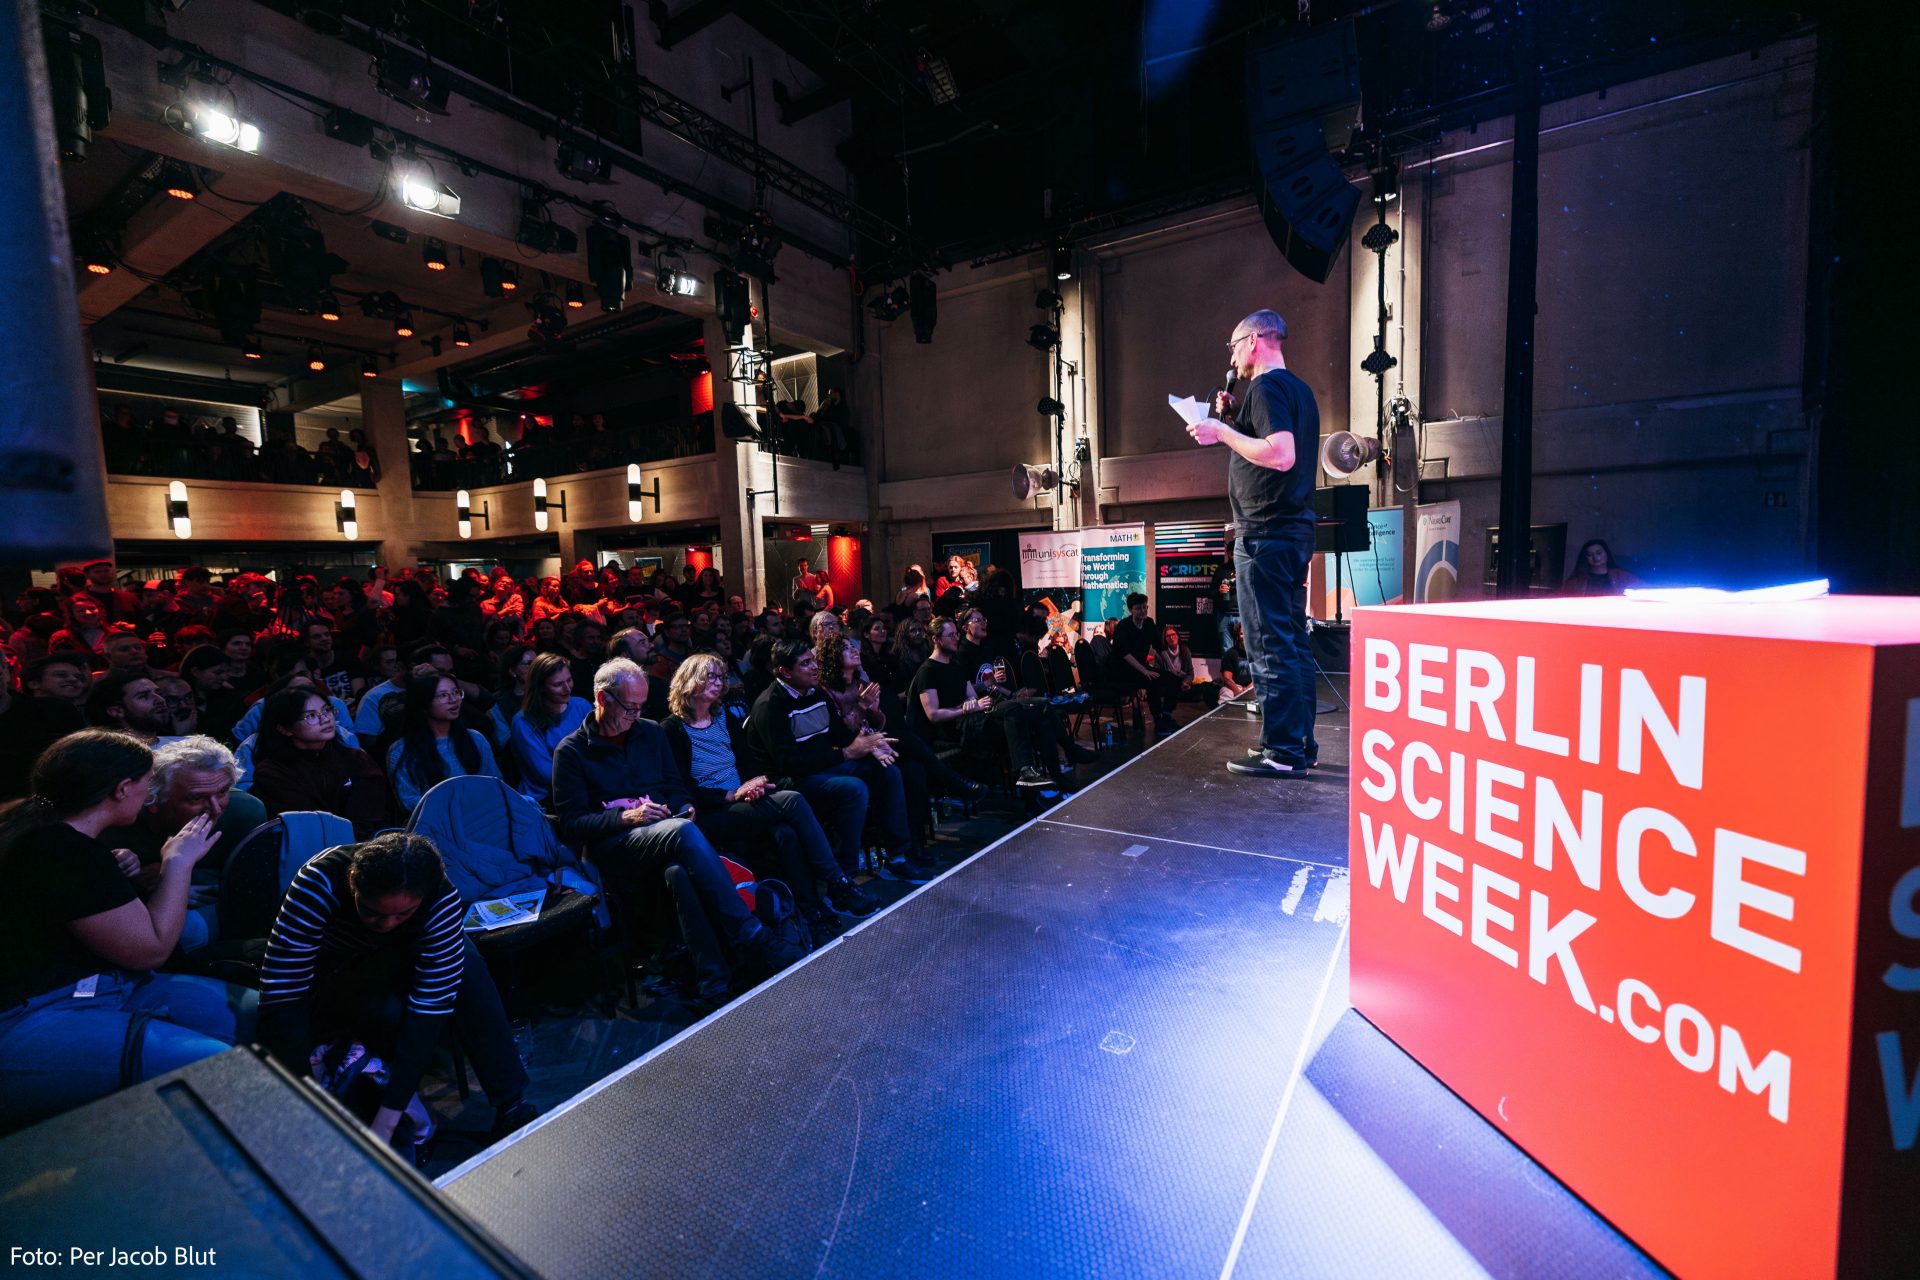 SCIoI at the Berlin Science Week with two performances – a Win at the Science Slam and a showcase of RoboFish